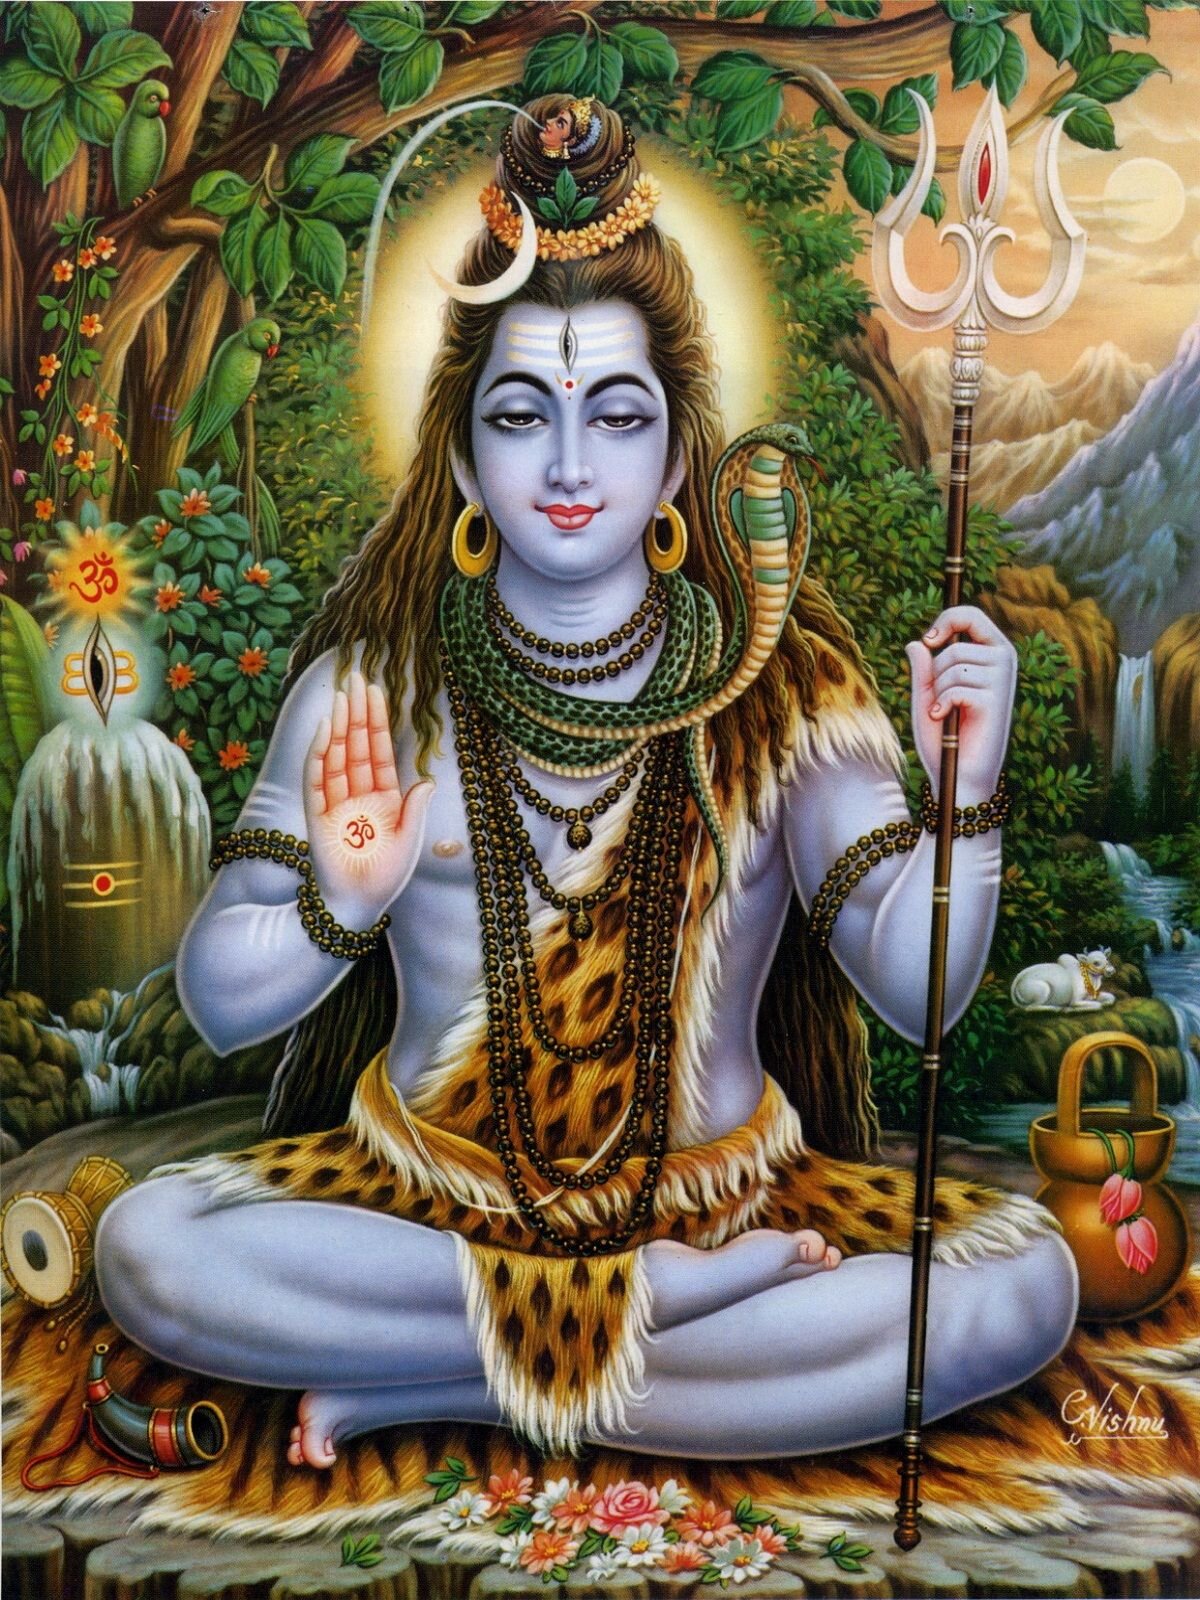 Lord Shiva: The Pioneer of Disruptive Innovation